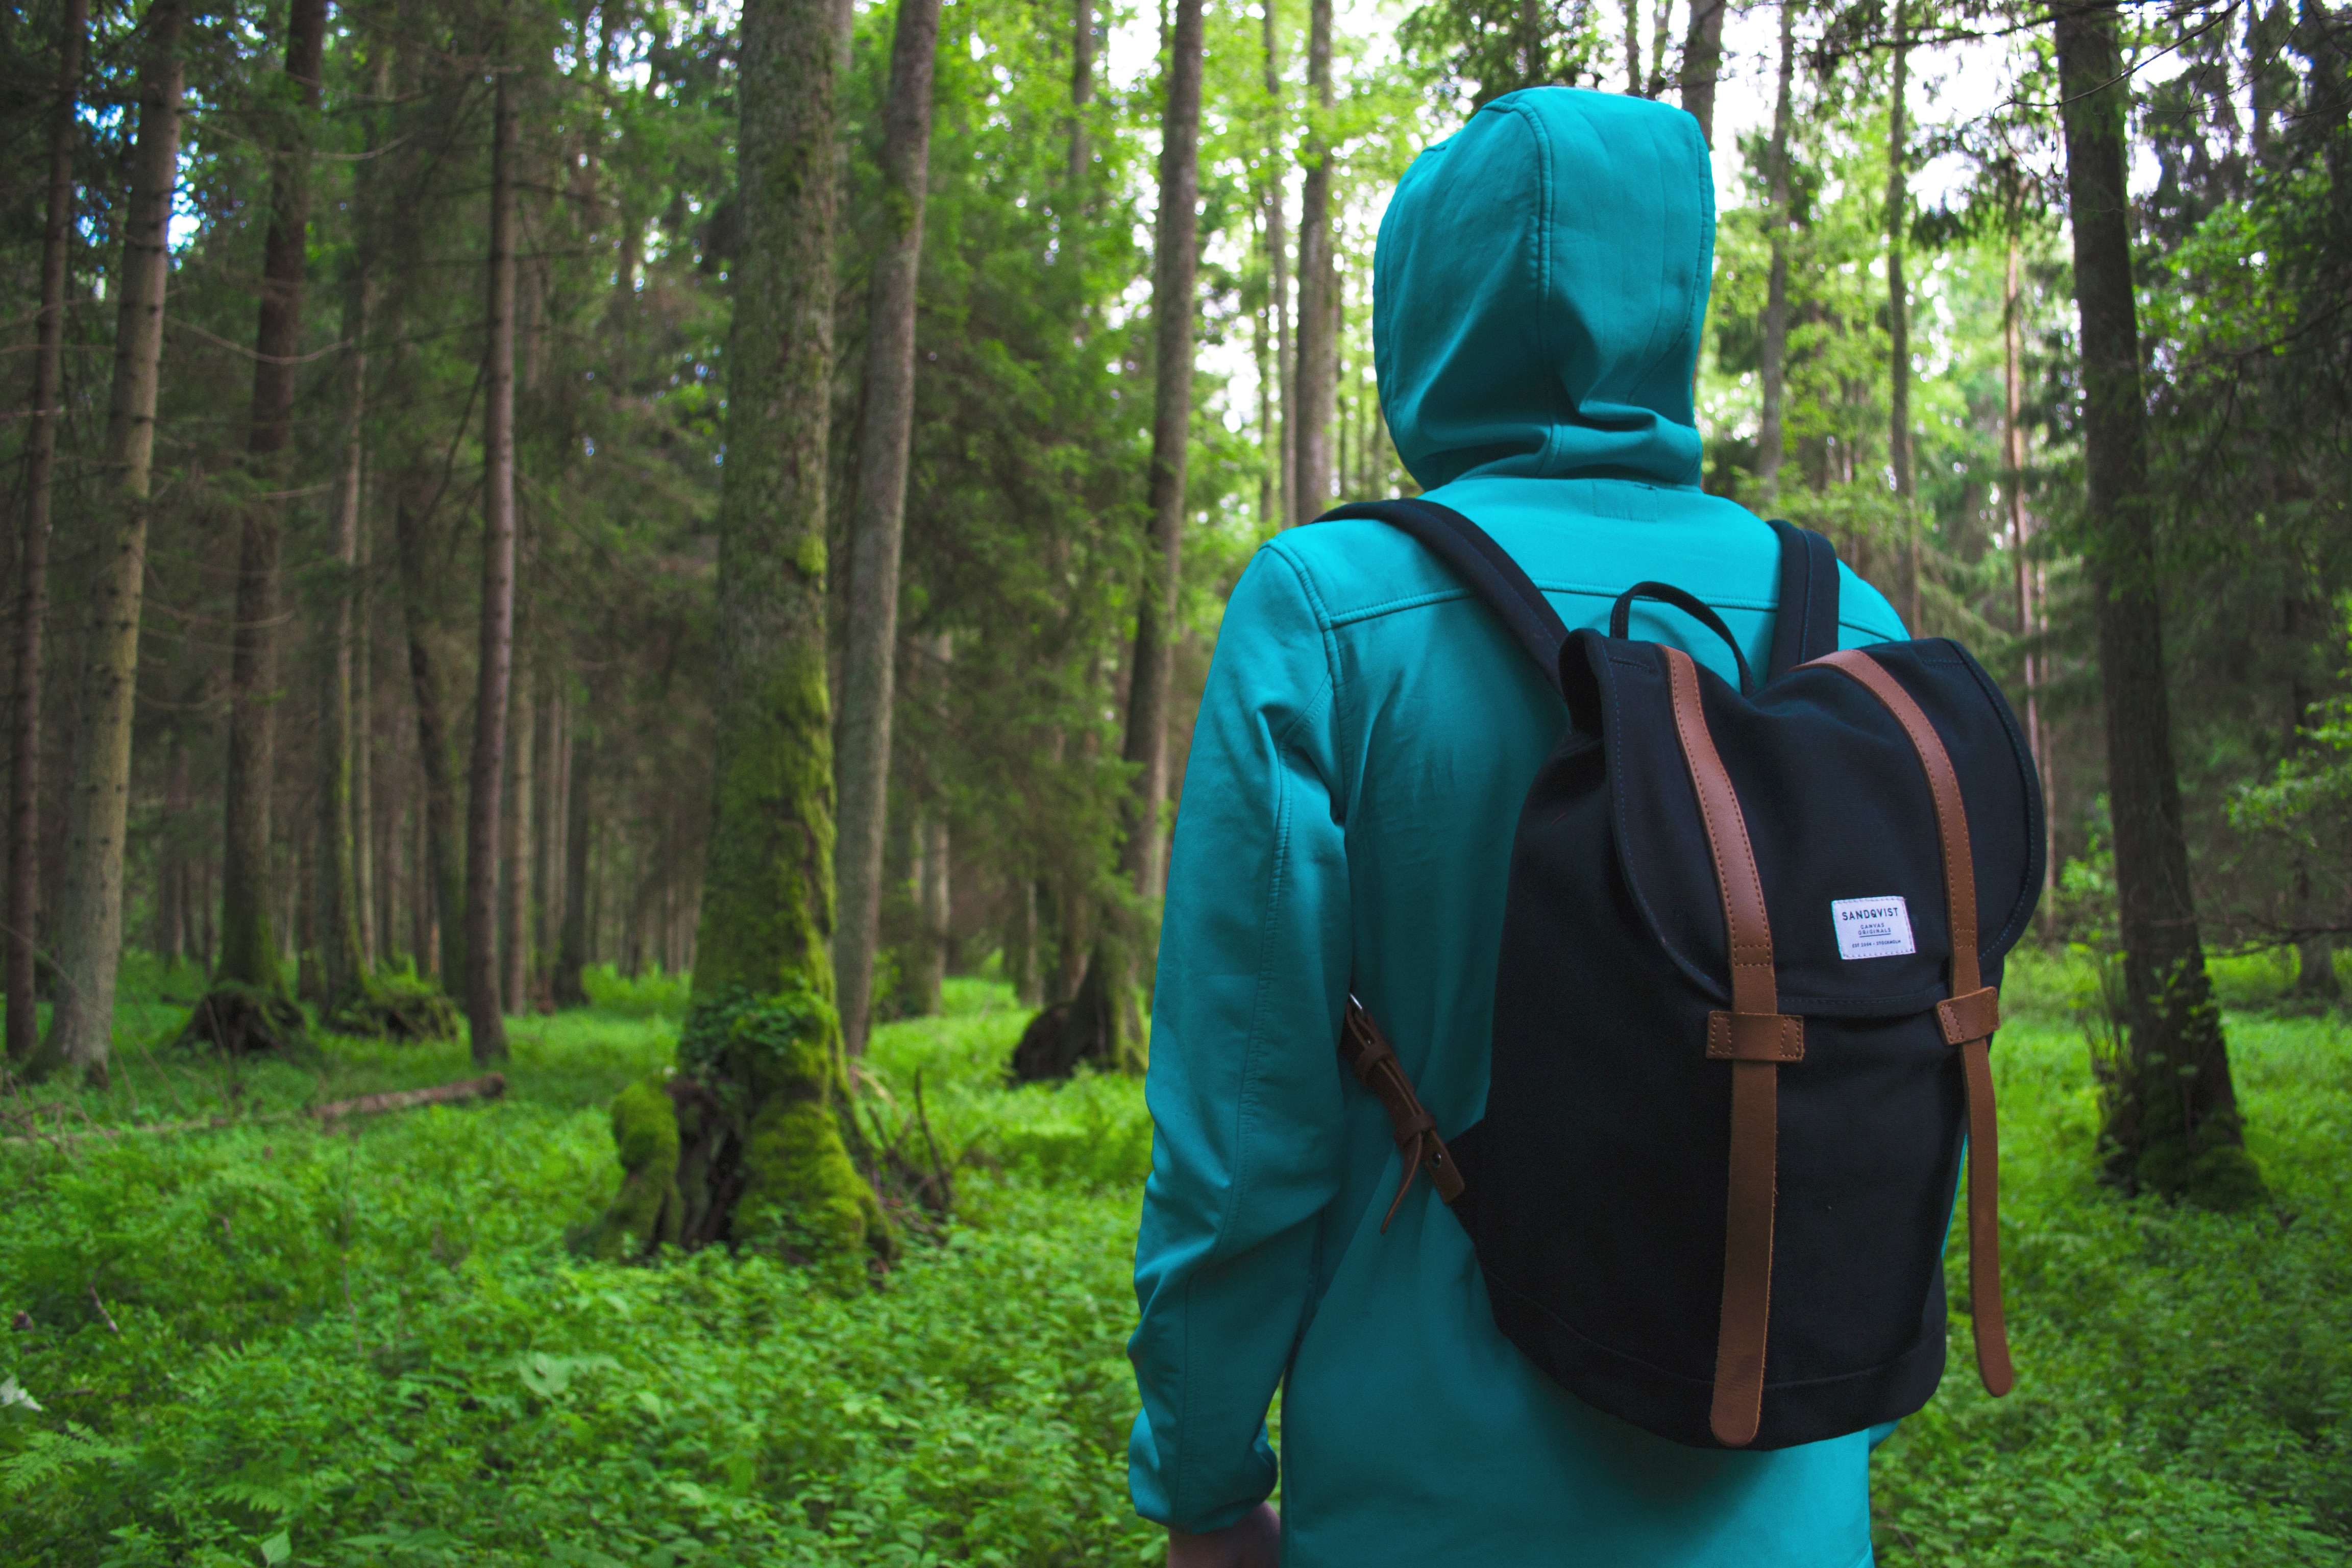 person in blue hoodie wearing brown and black backpack standing near forest during daytime